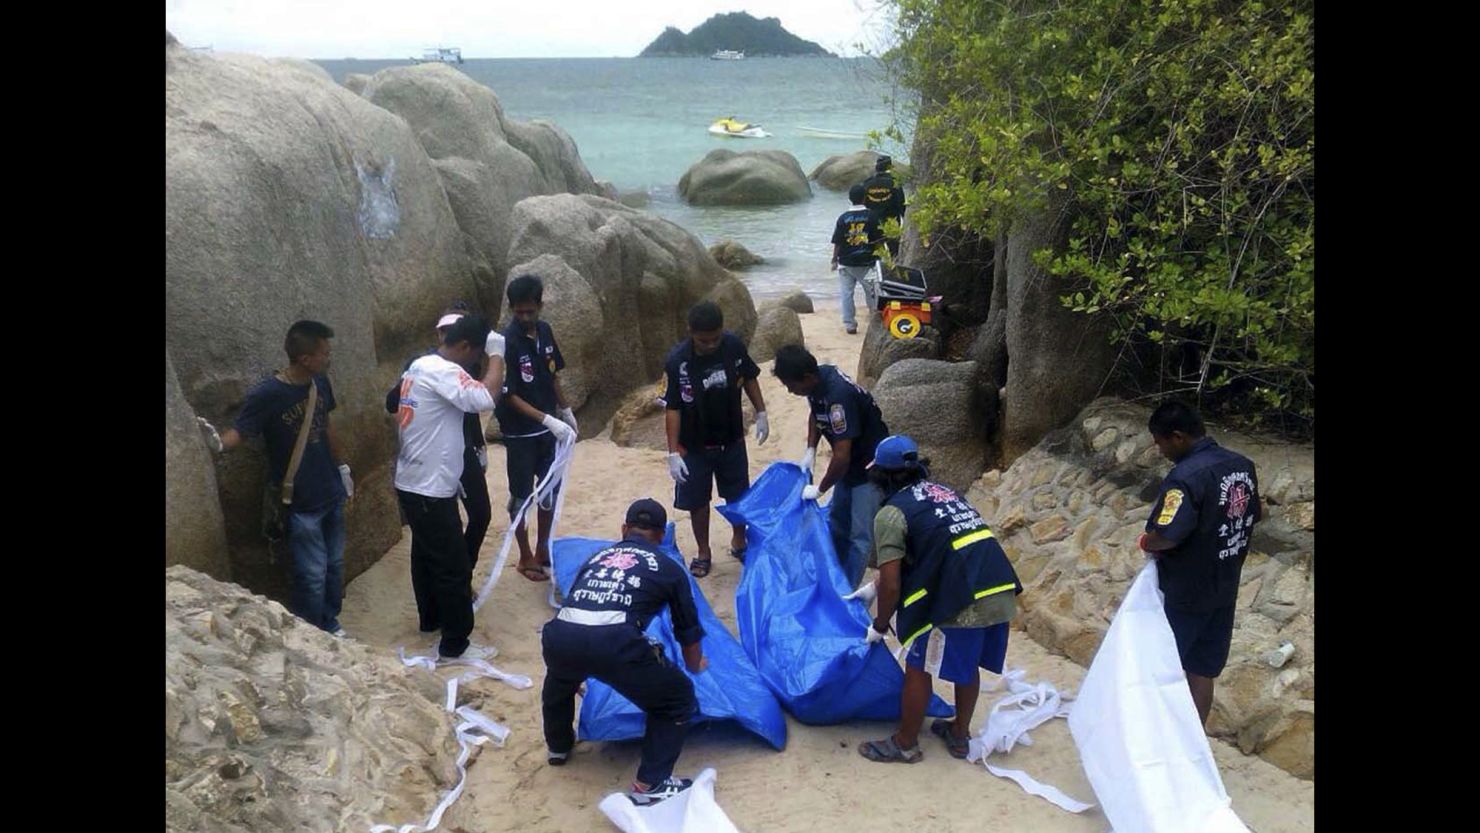 Thai police work near the bodies of two British tourists on the Thai island of  Koh Tao on September 15, 2014.